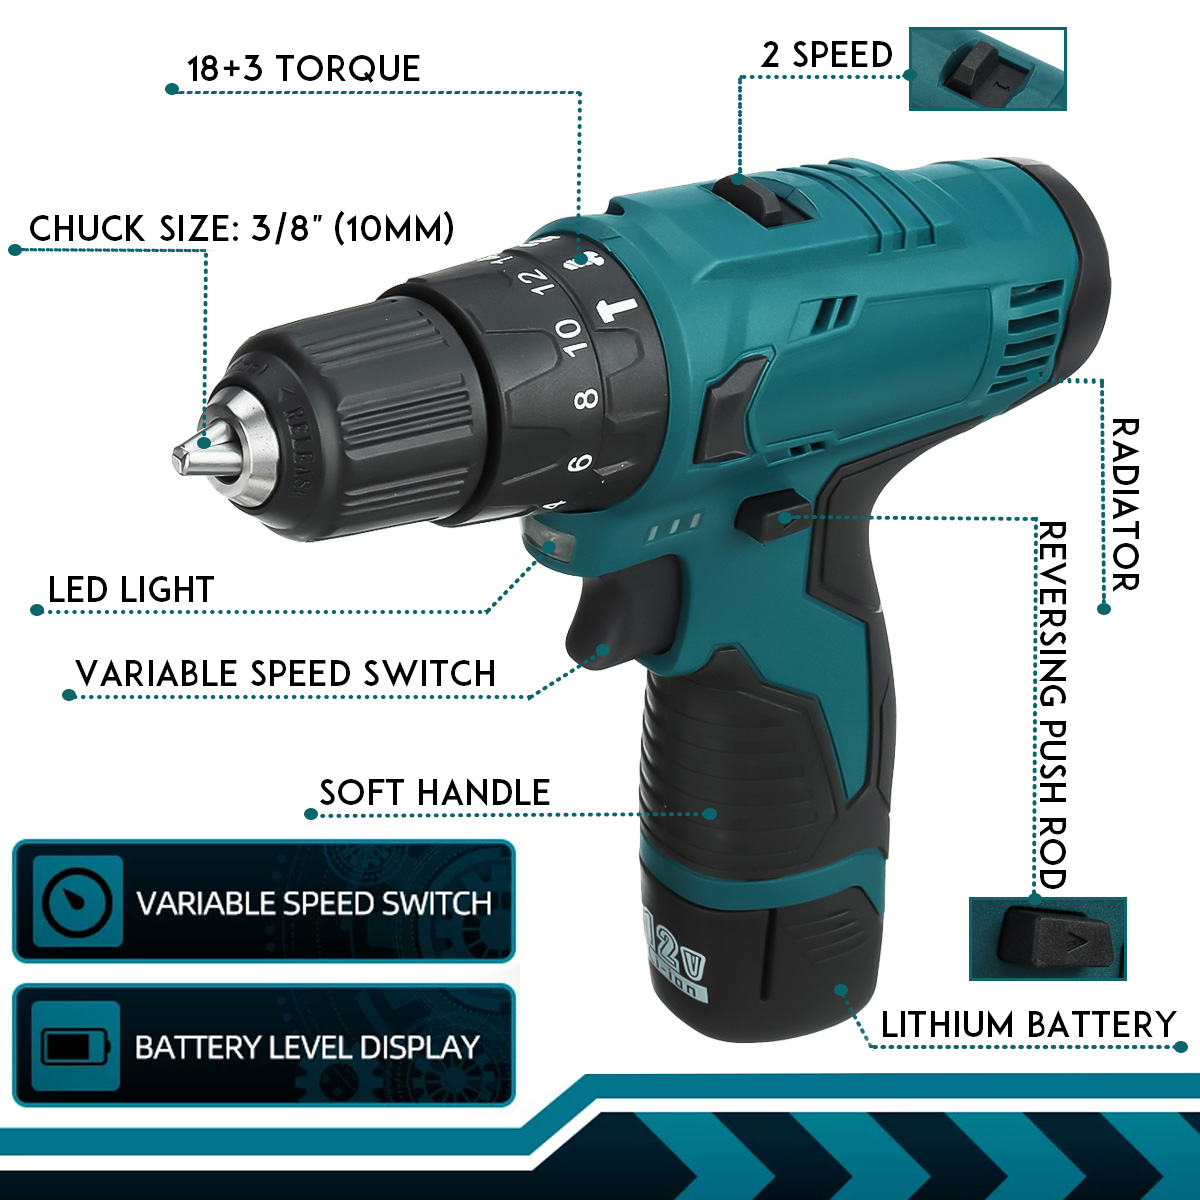 12V-1500mAh-3-IN-1-2-Speed-Cordless-Drill-Driver-Electric-Screwdriver-Hammer-Flat-Drill-183-Torque-1-1868432-5